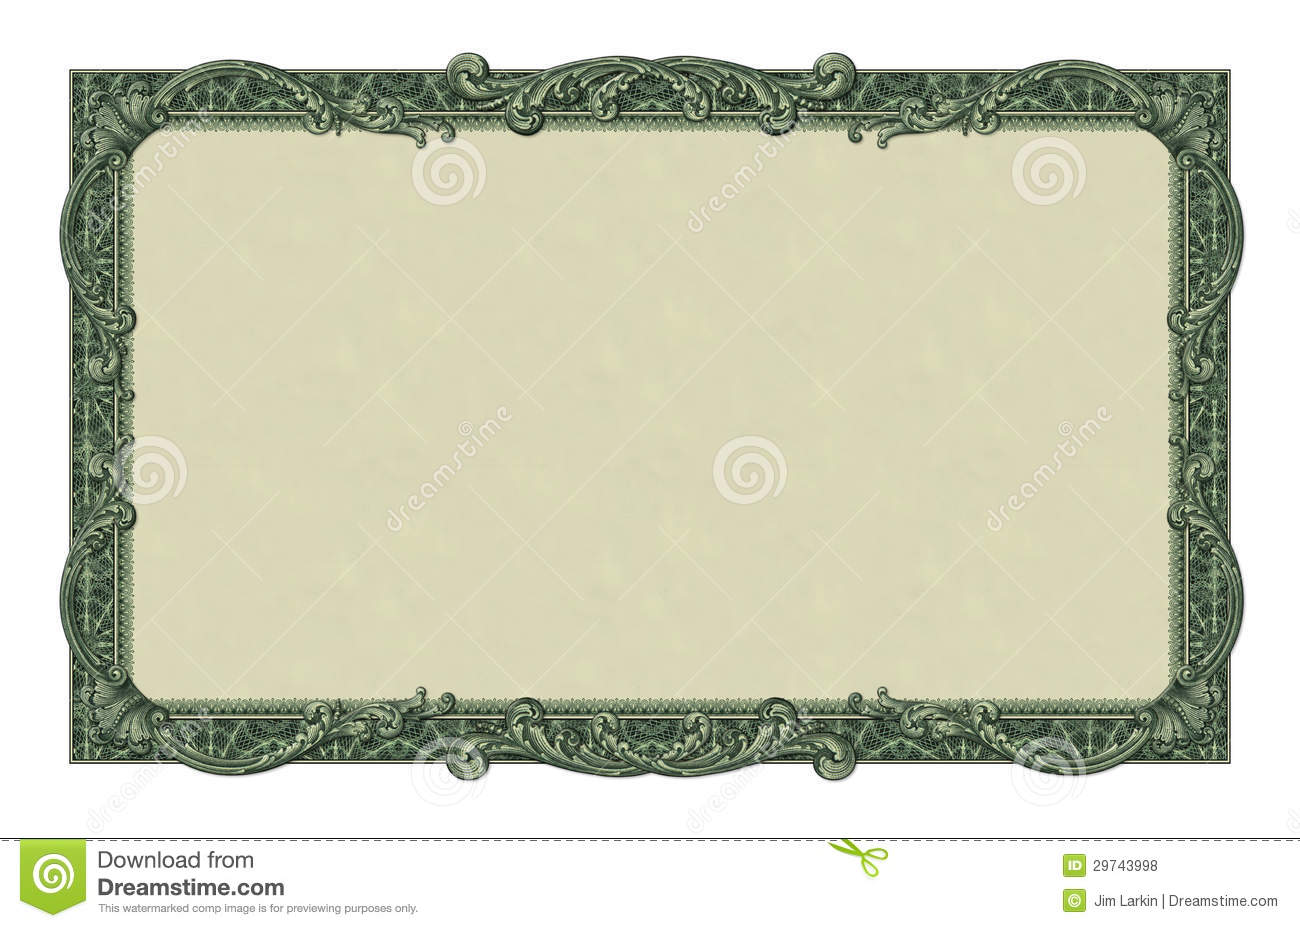 Illustration Of A Border Frame Using Elements From A Dollar Bill